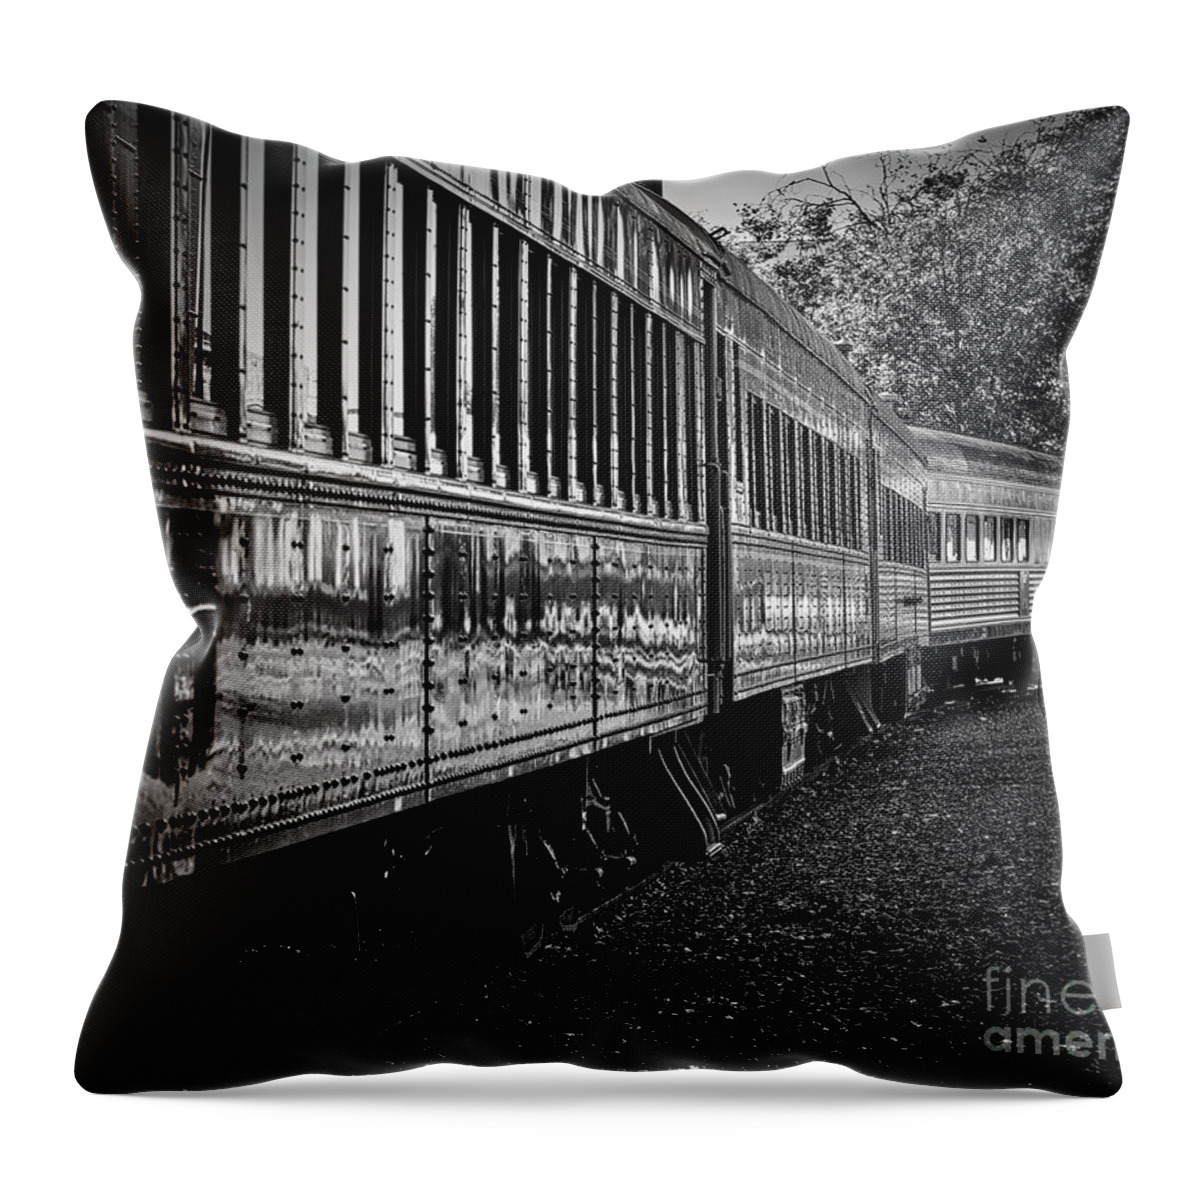 Between Trains Throw Pillow featuring the photograph Between Trains by Mitch Shindelbower